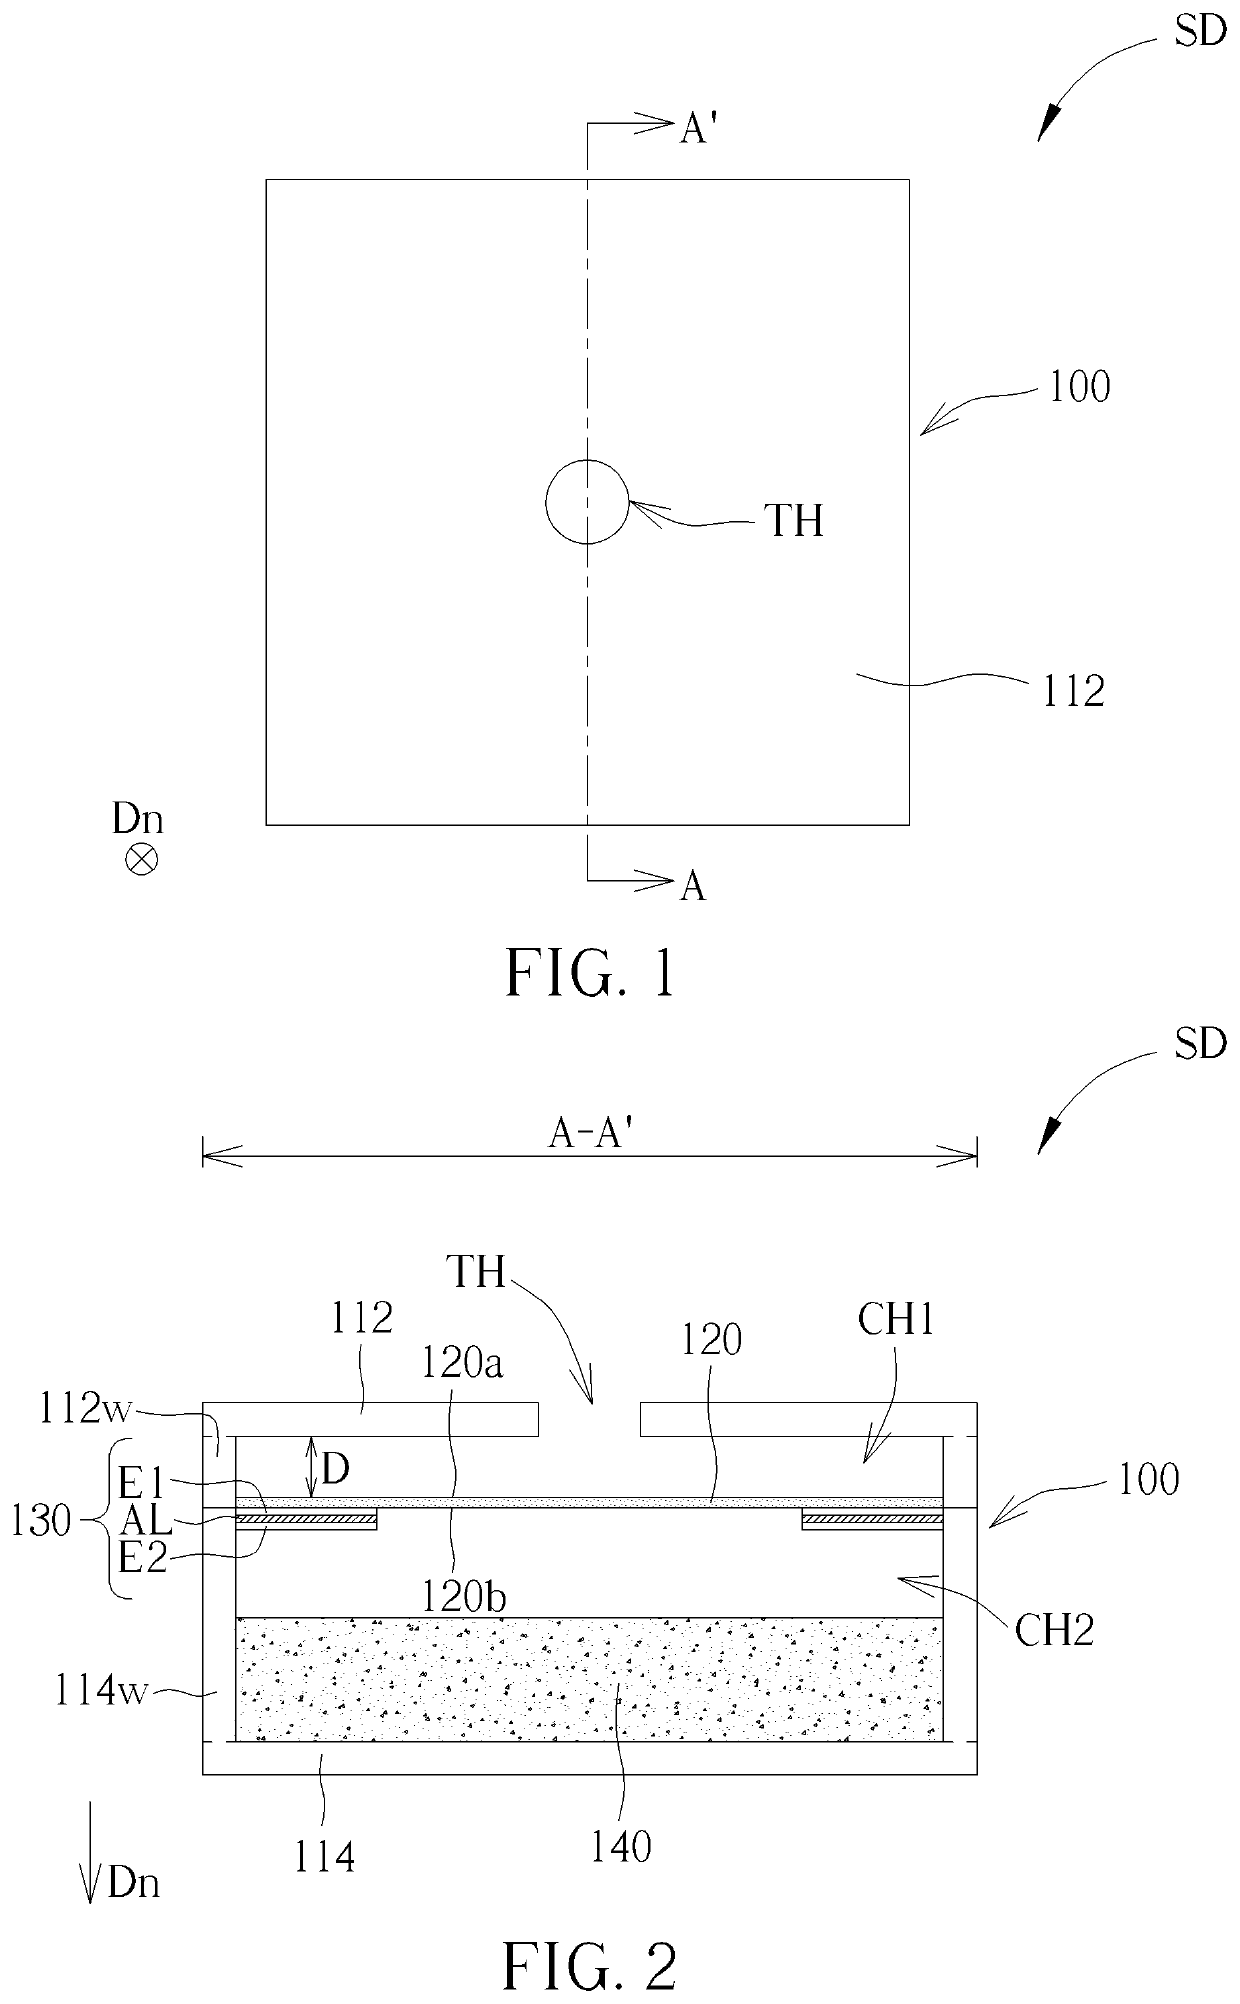 Sound producing device